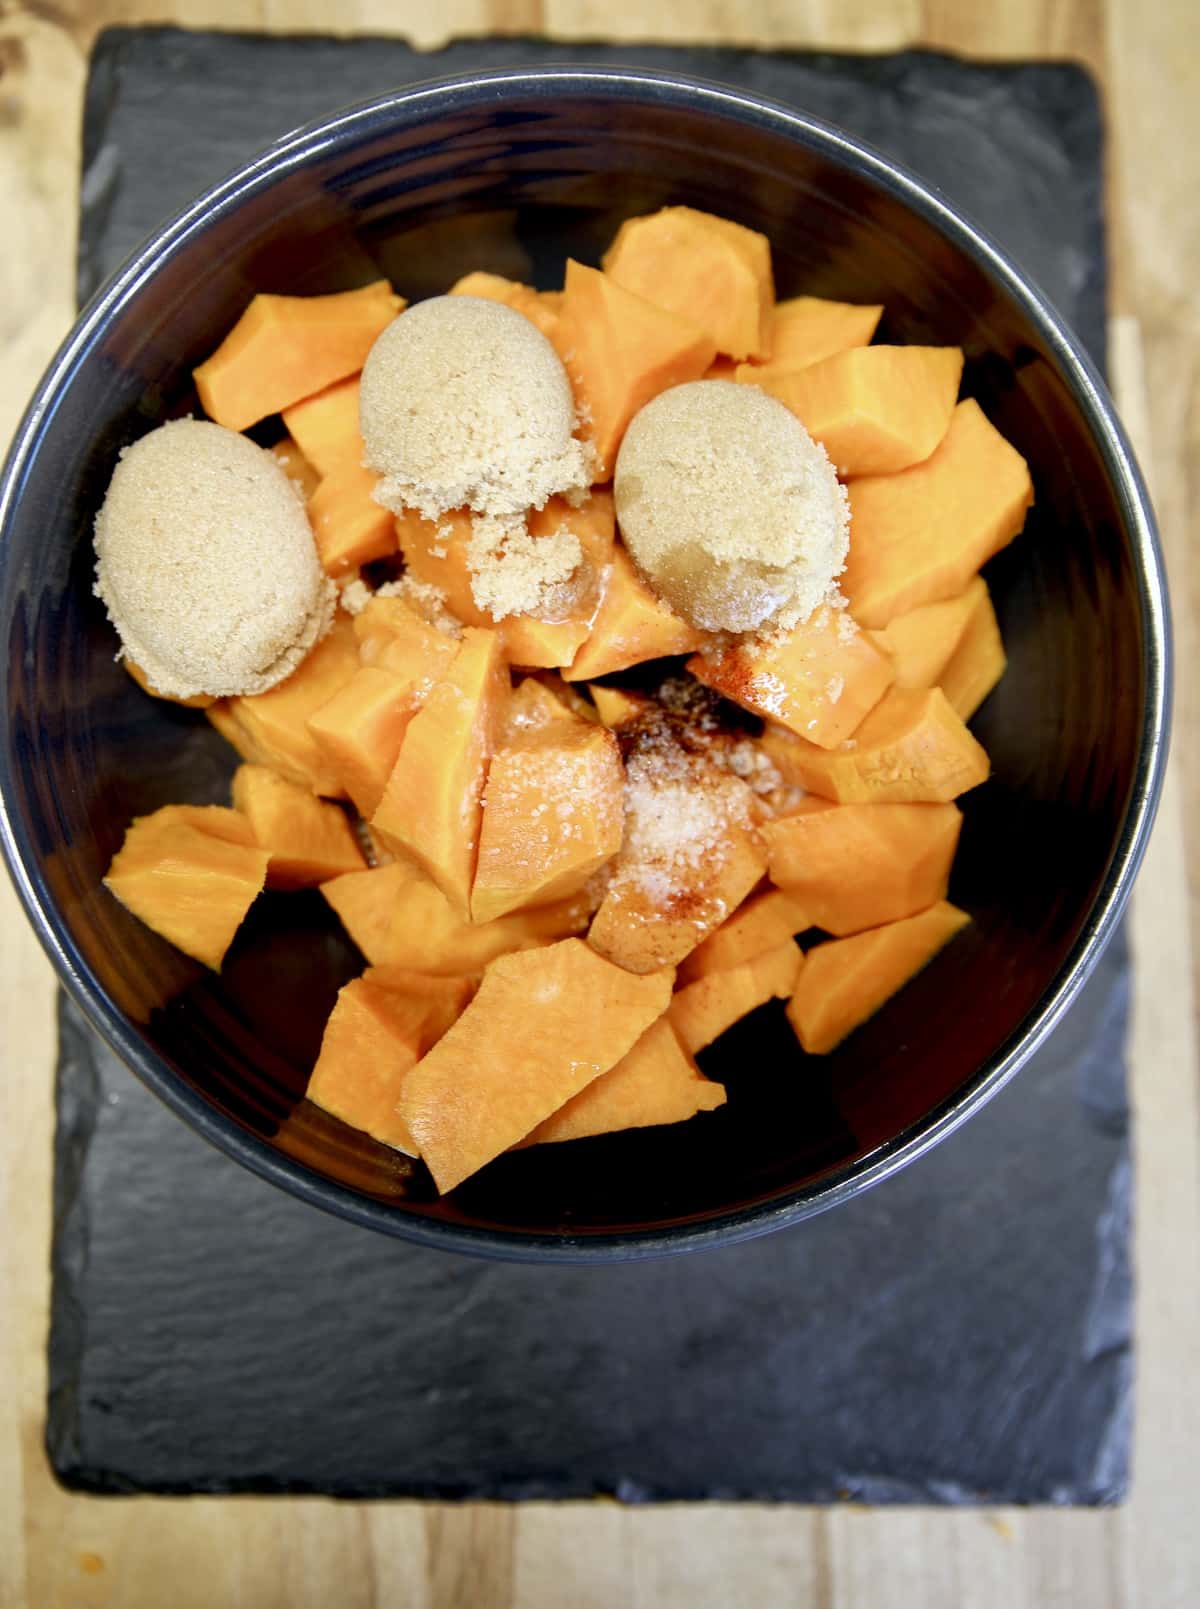 Bowl of chopped sweet potatoes with brown sugar & butter.